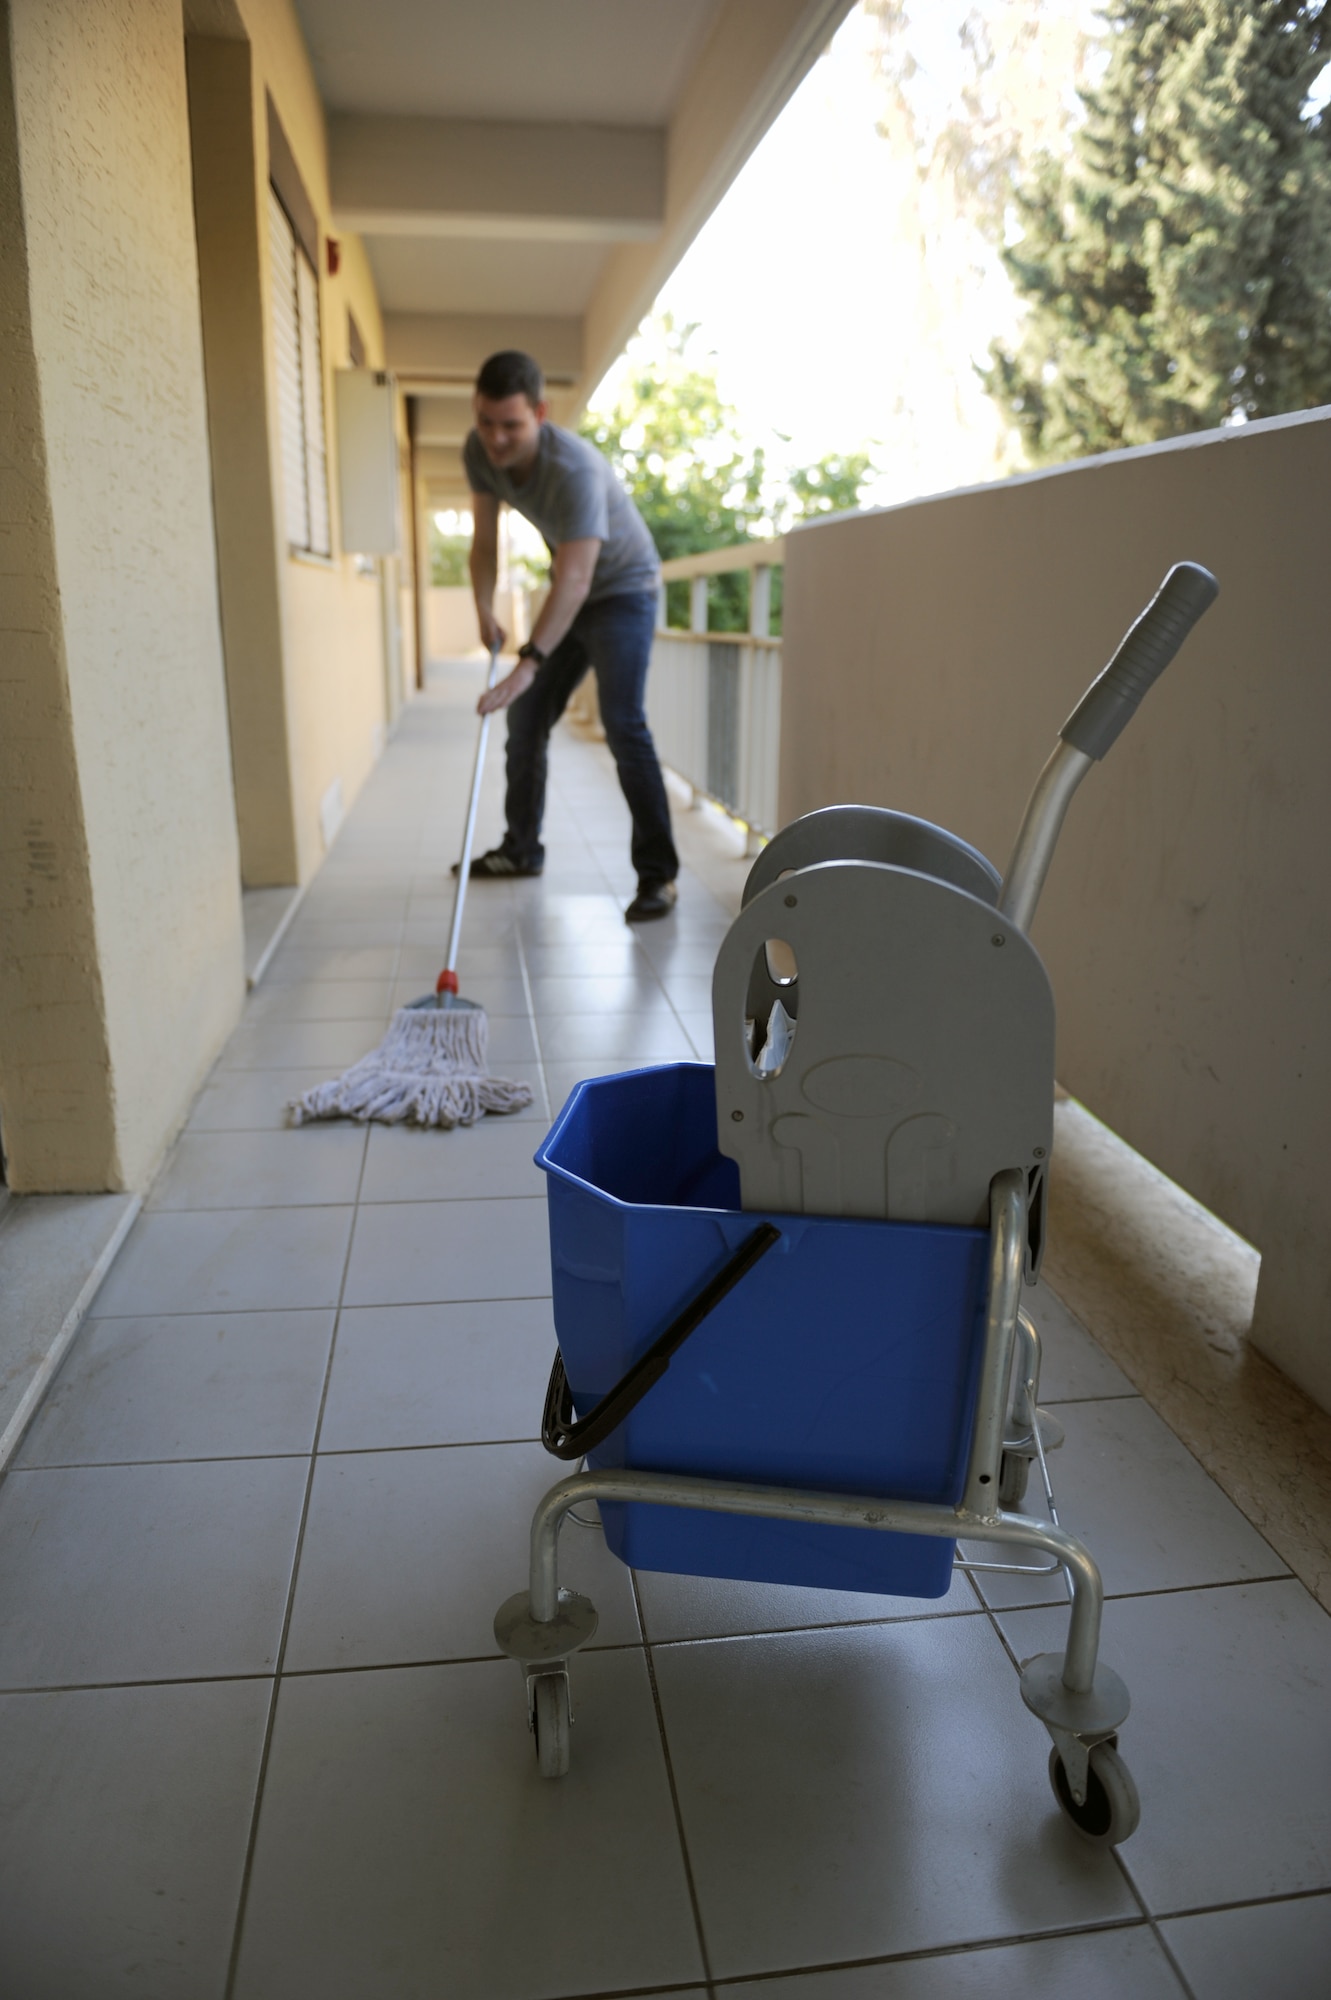 Airman 1st Class Nicholas Crisp, Armed Forces Network-Incirlik broadcaster, cleans outside of the dorms as part of the second annual Dorm Spring Cleaning April 26, 2013, at Incirlik Air Base, Turkey. The dorm cleaning was created as a way to show pride and encourage a sense of community for Airman’s living areas. (U.S. Air Force photo by Senior Airman Daniel Phelps/Released)